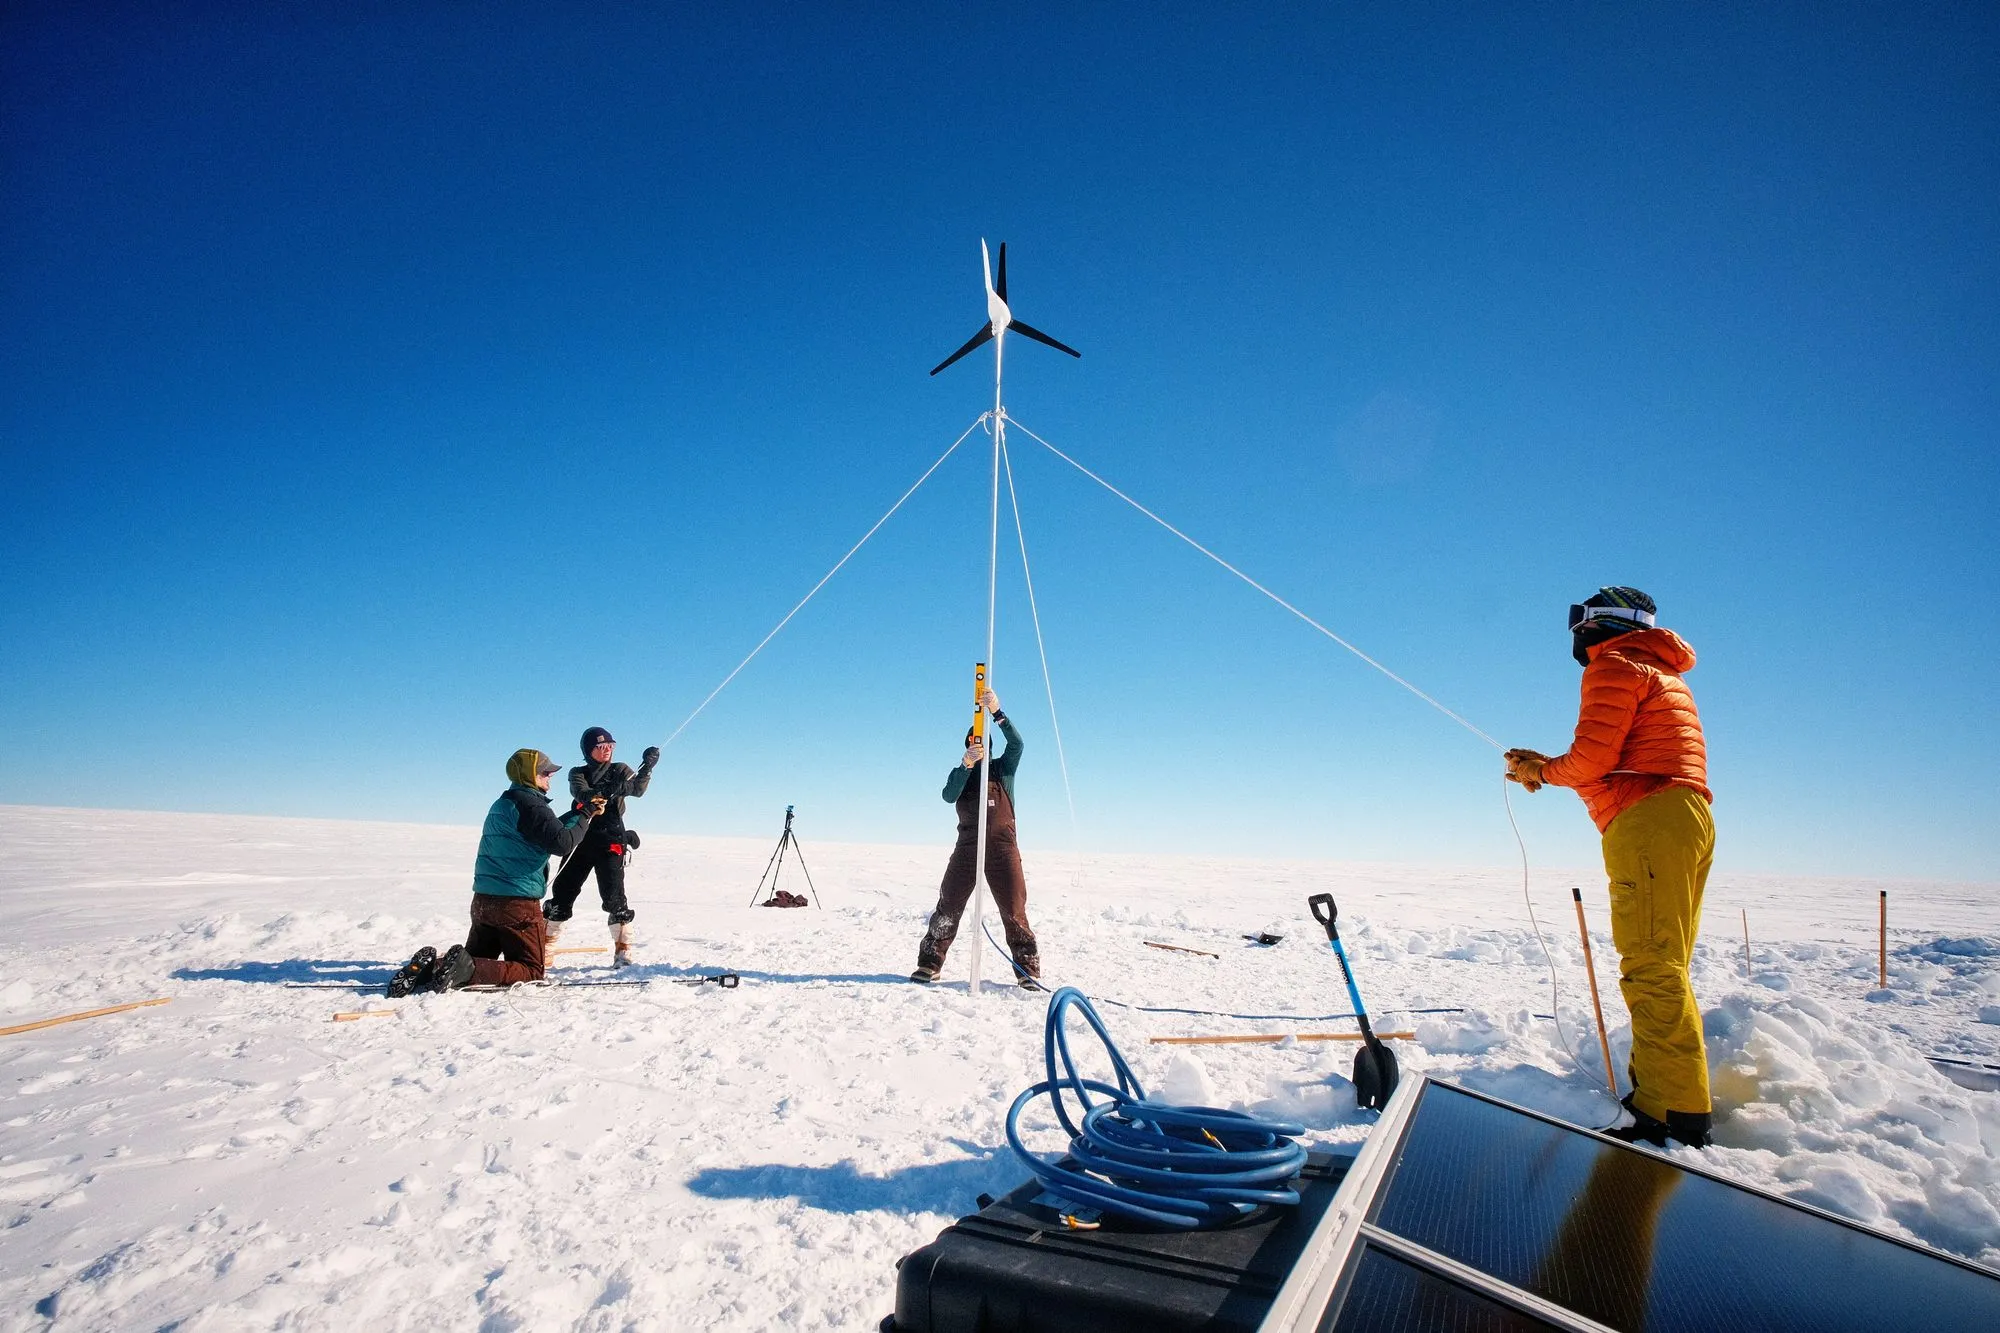 Four members of the install team hold and secure a wind turbine.